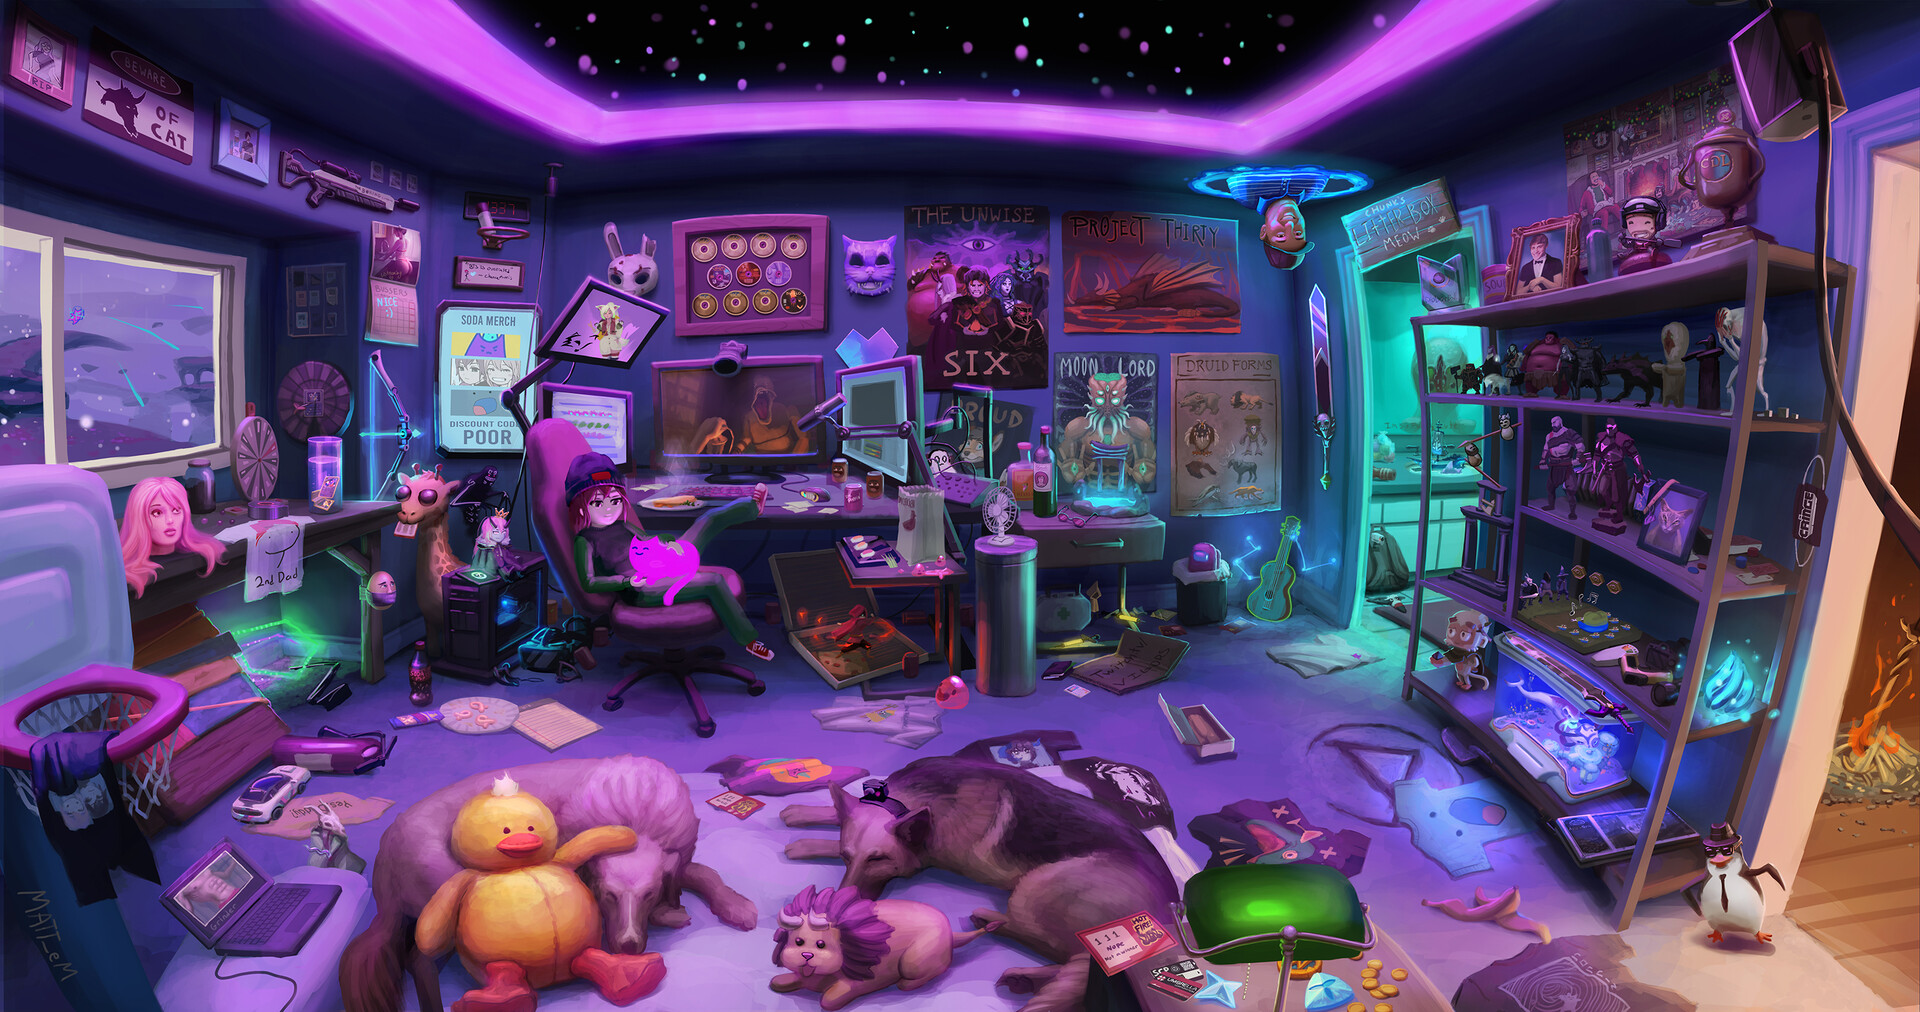 Room Dog Toys Futuristic Portal Ceiling Space Figures Cats Messy Women Anime Girls Gamer Stuffed Ani 1920x1012